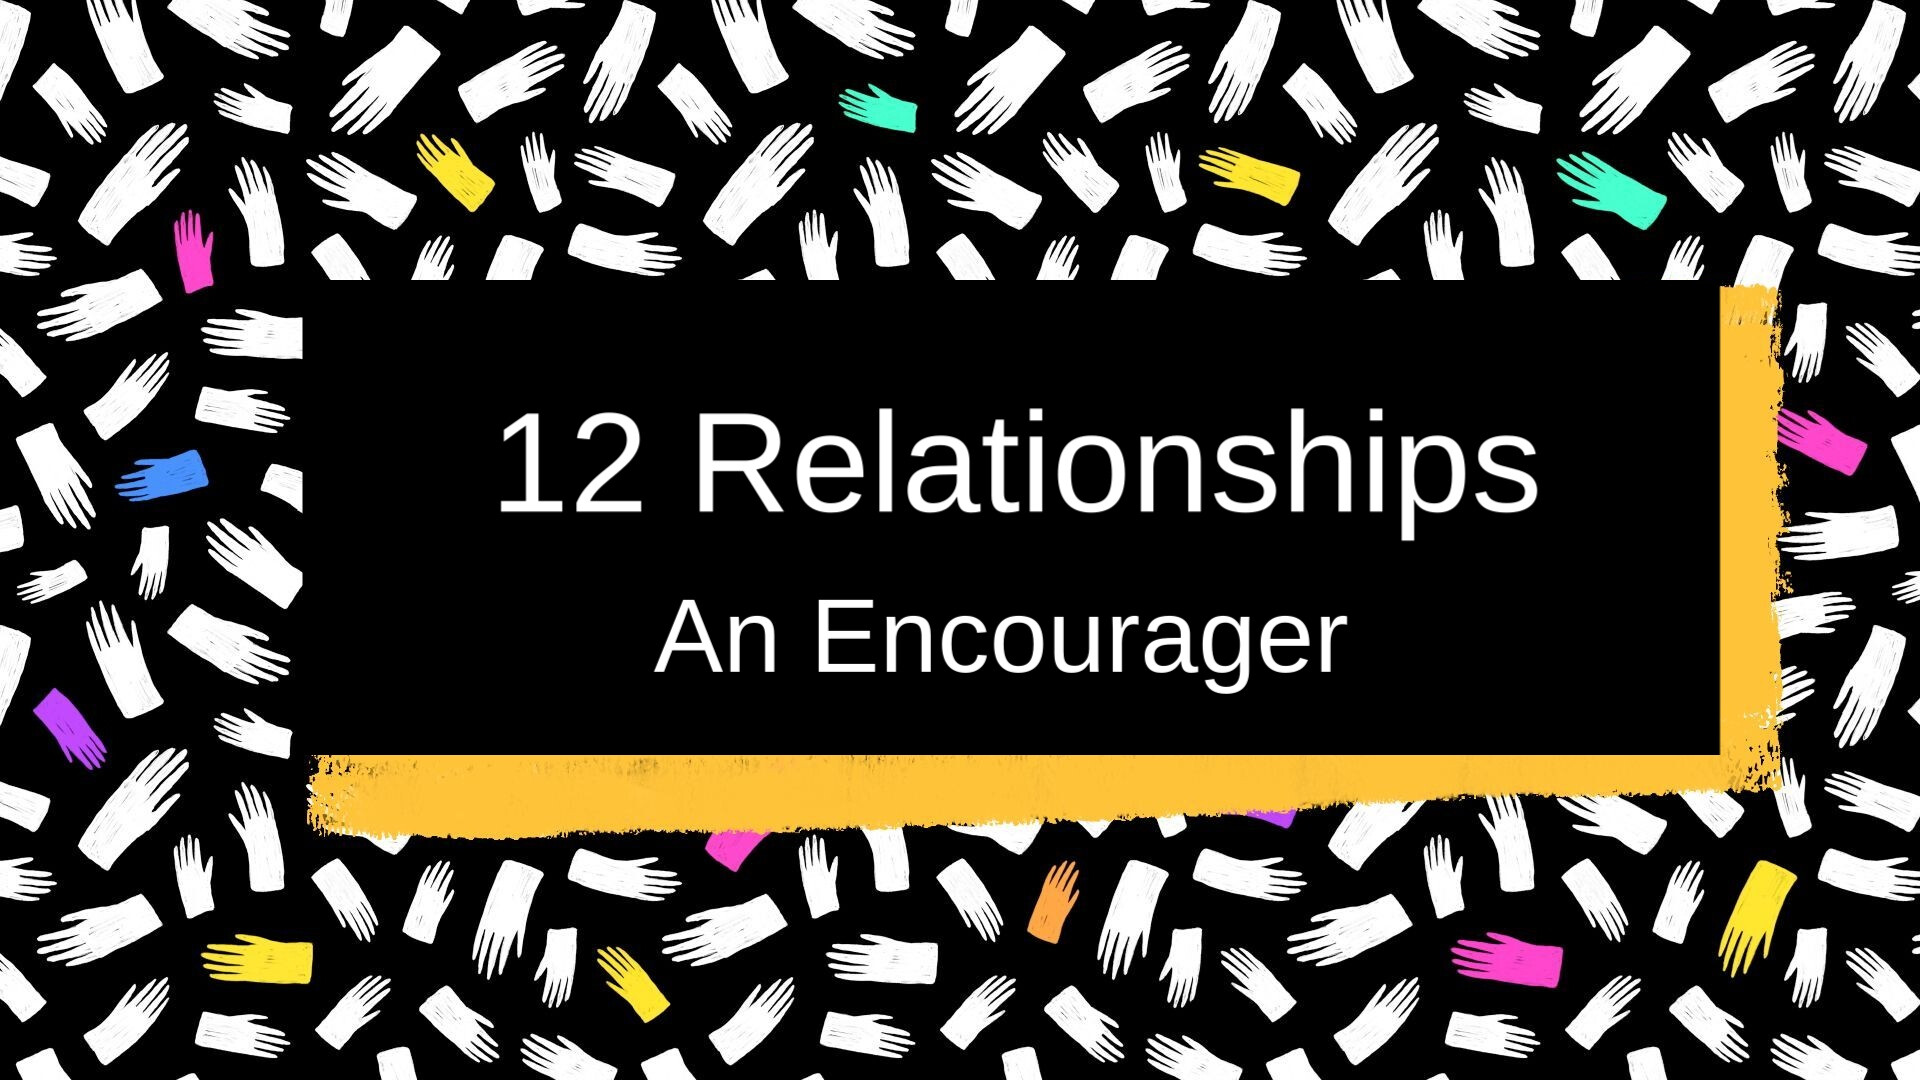 12 Relationships: An Encourager